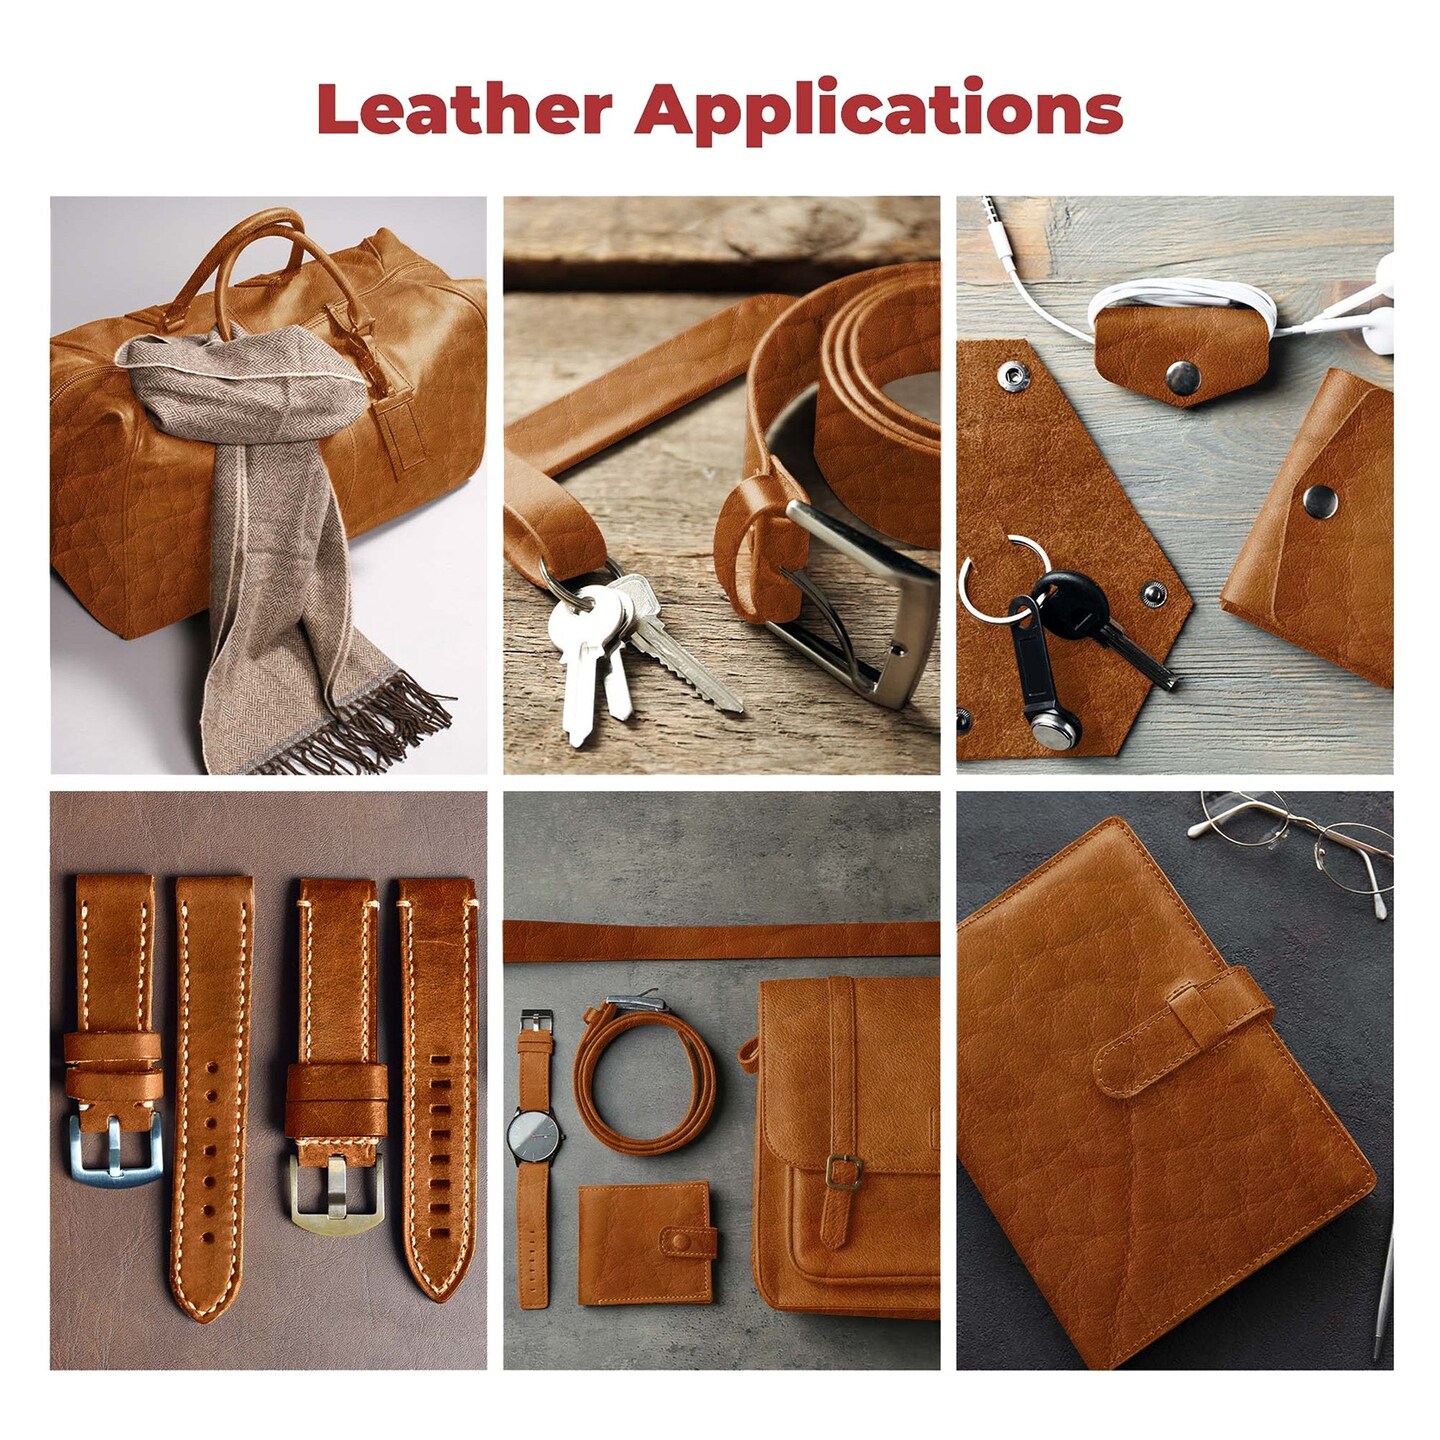 ELW Genuine American Leather Bison 8-9 oz (3.2-3.4mm) Pre-Cut - 4 to 23 SQ FT -Full Grain Leather&#xA0;Bison Hide DIY Craft Projects, Bag, Chap, Motorcycle, Clothing, Jewelry, Moccasins